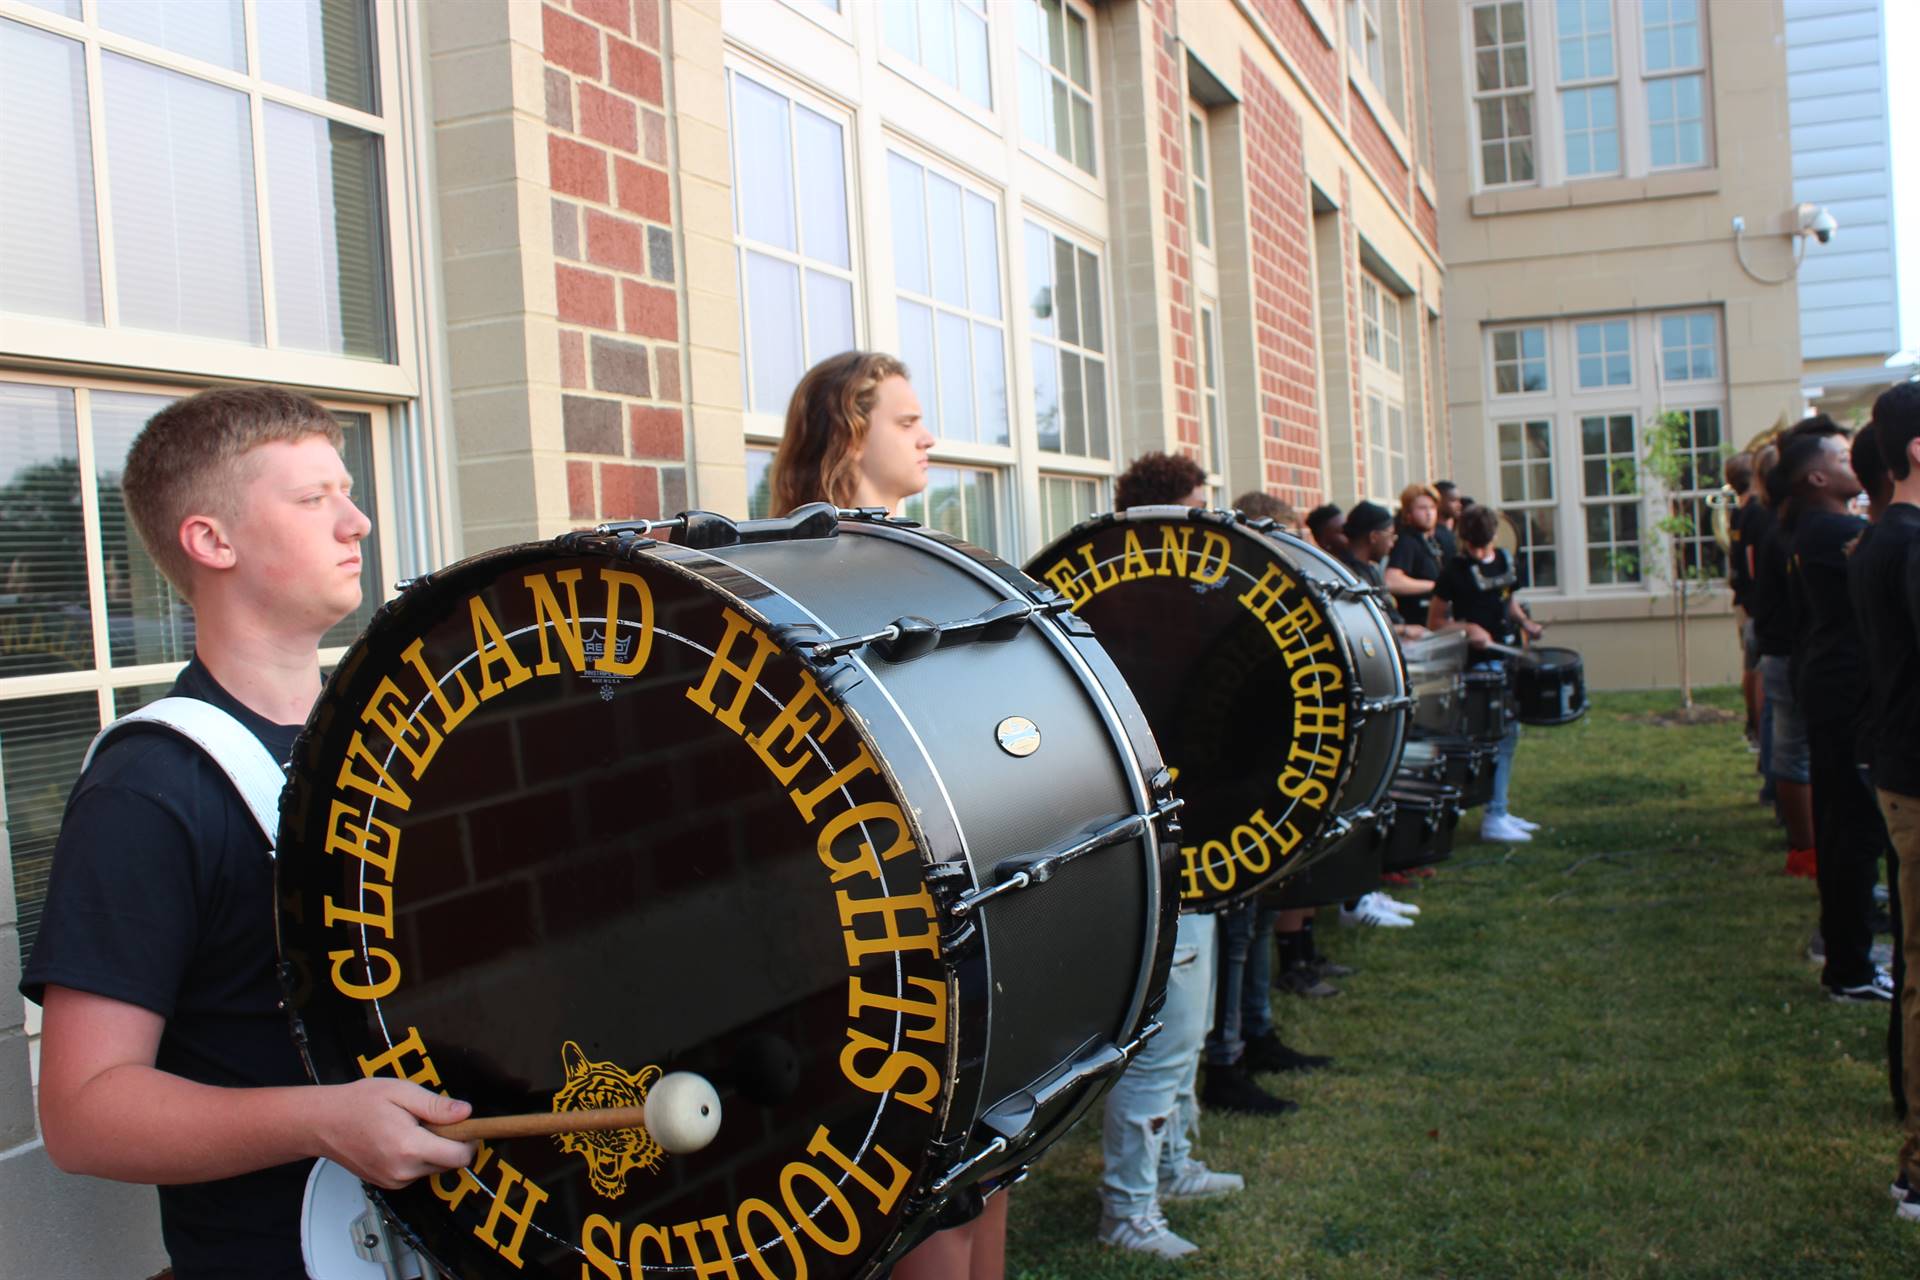 Marching band playing outside